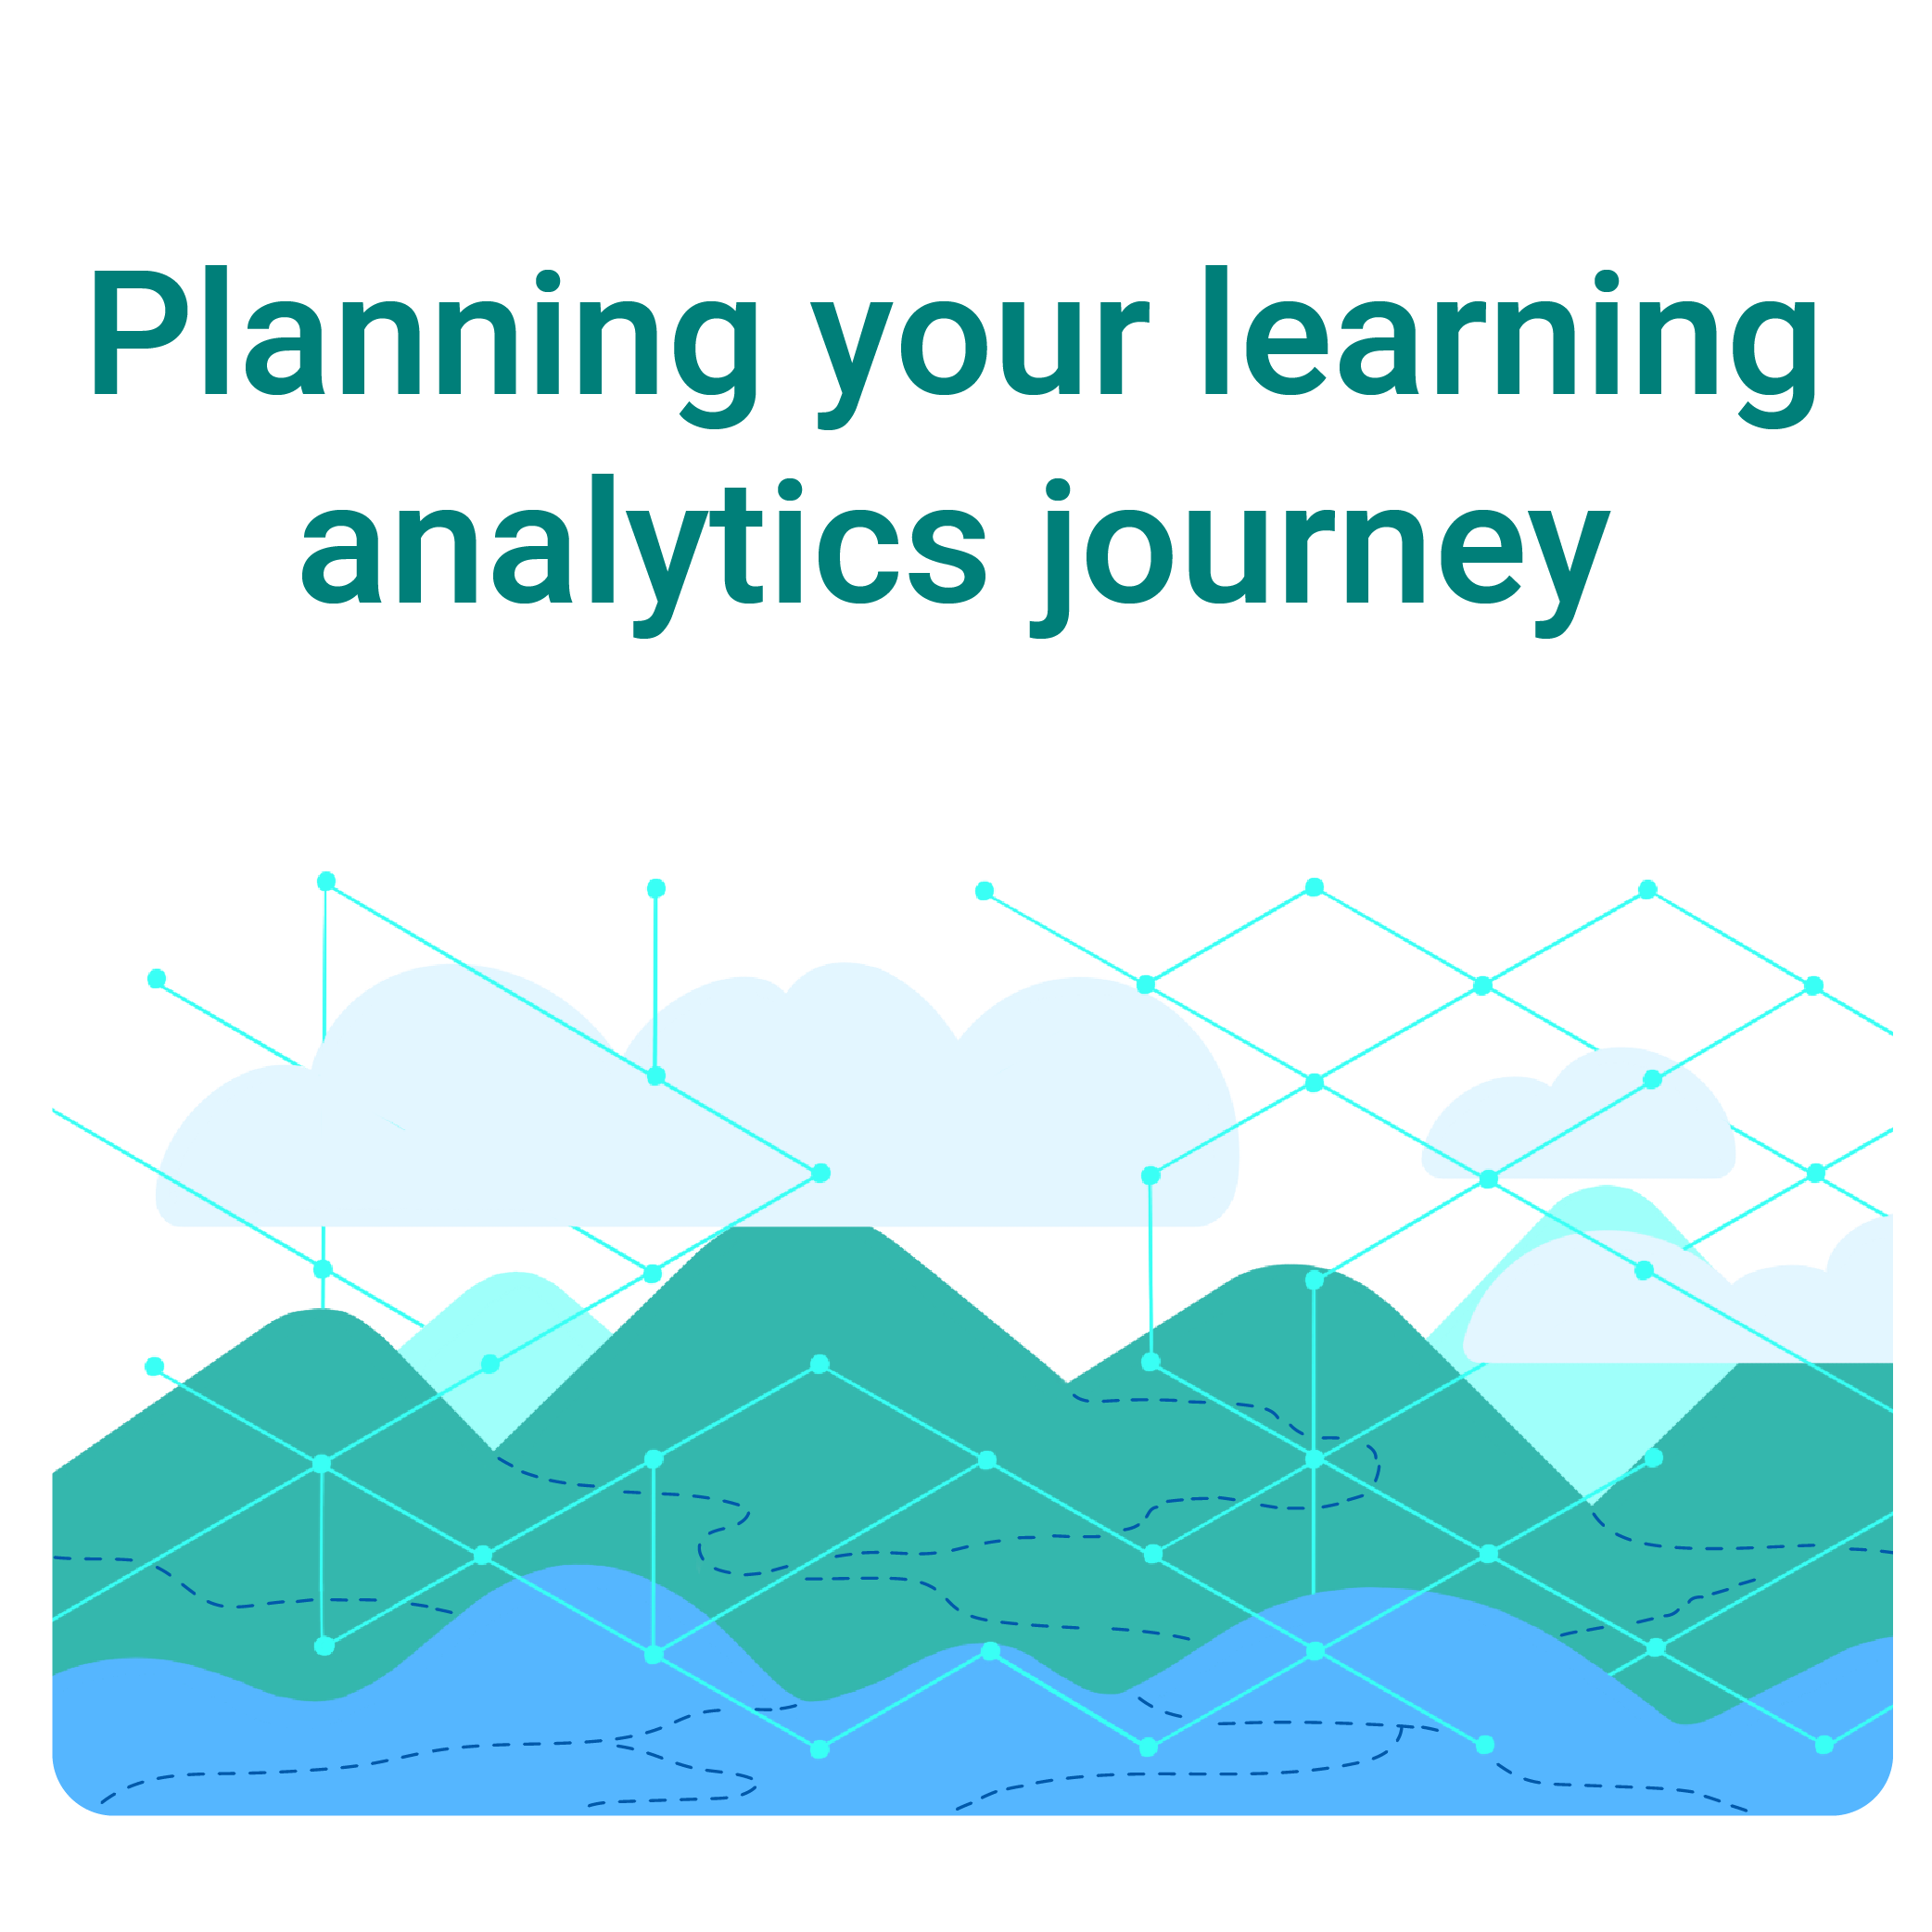 Planning learning analytics journey resources